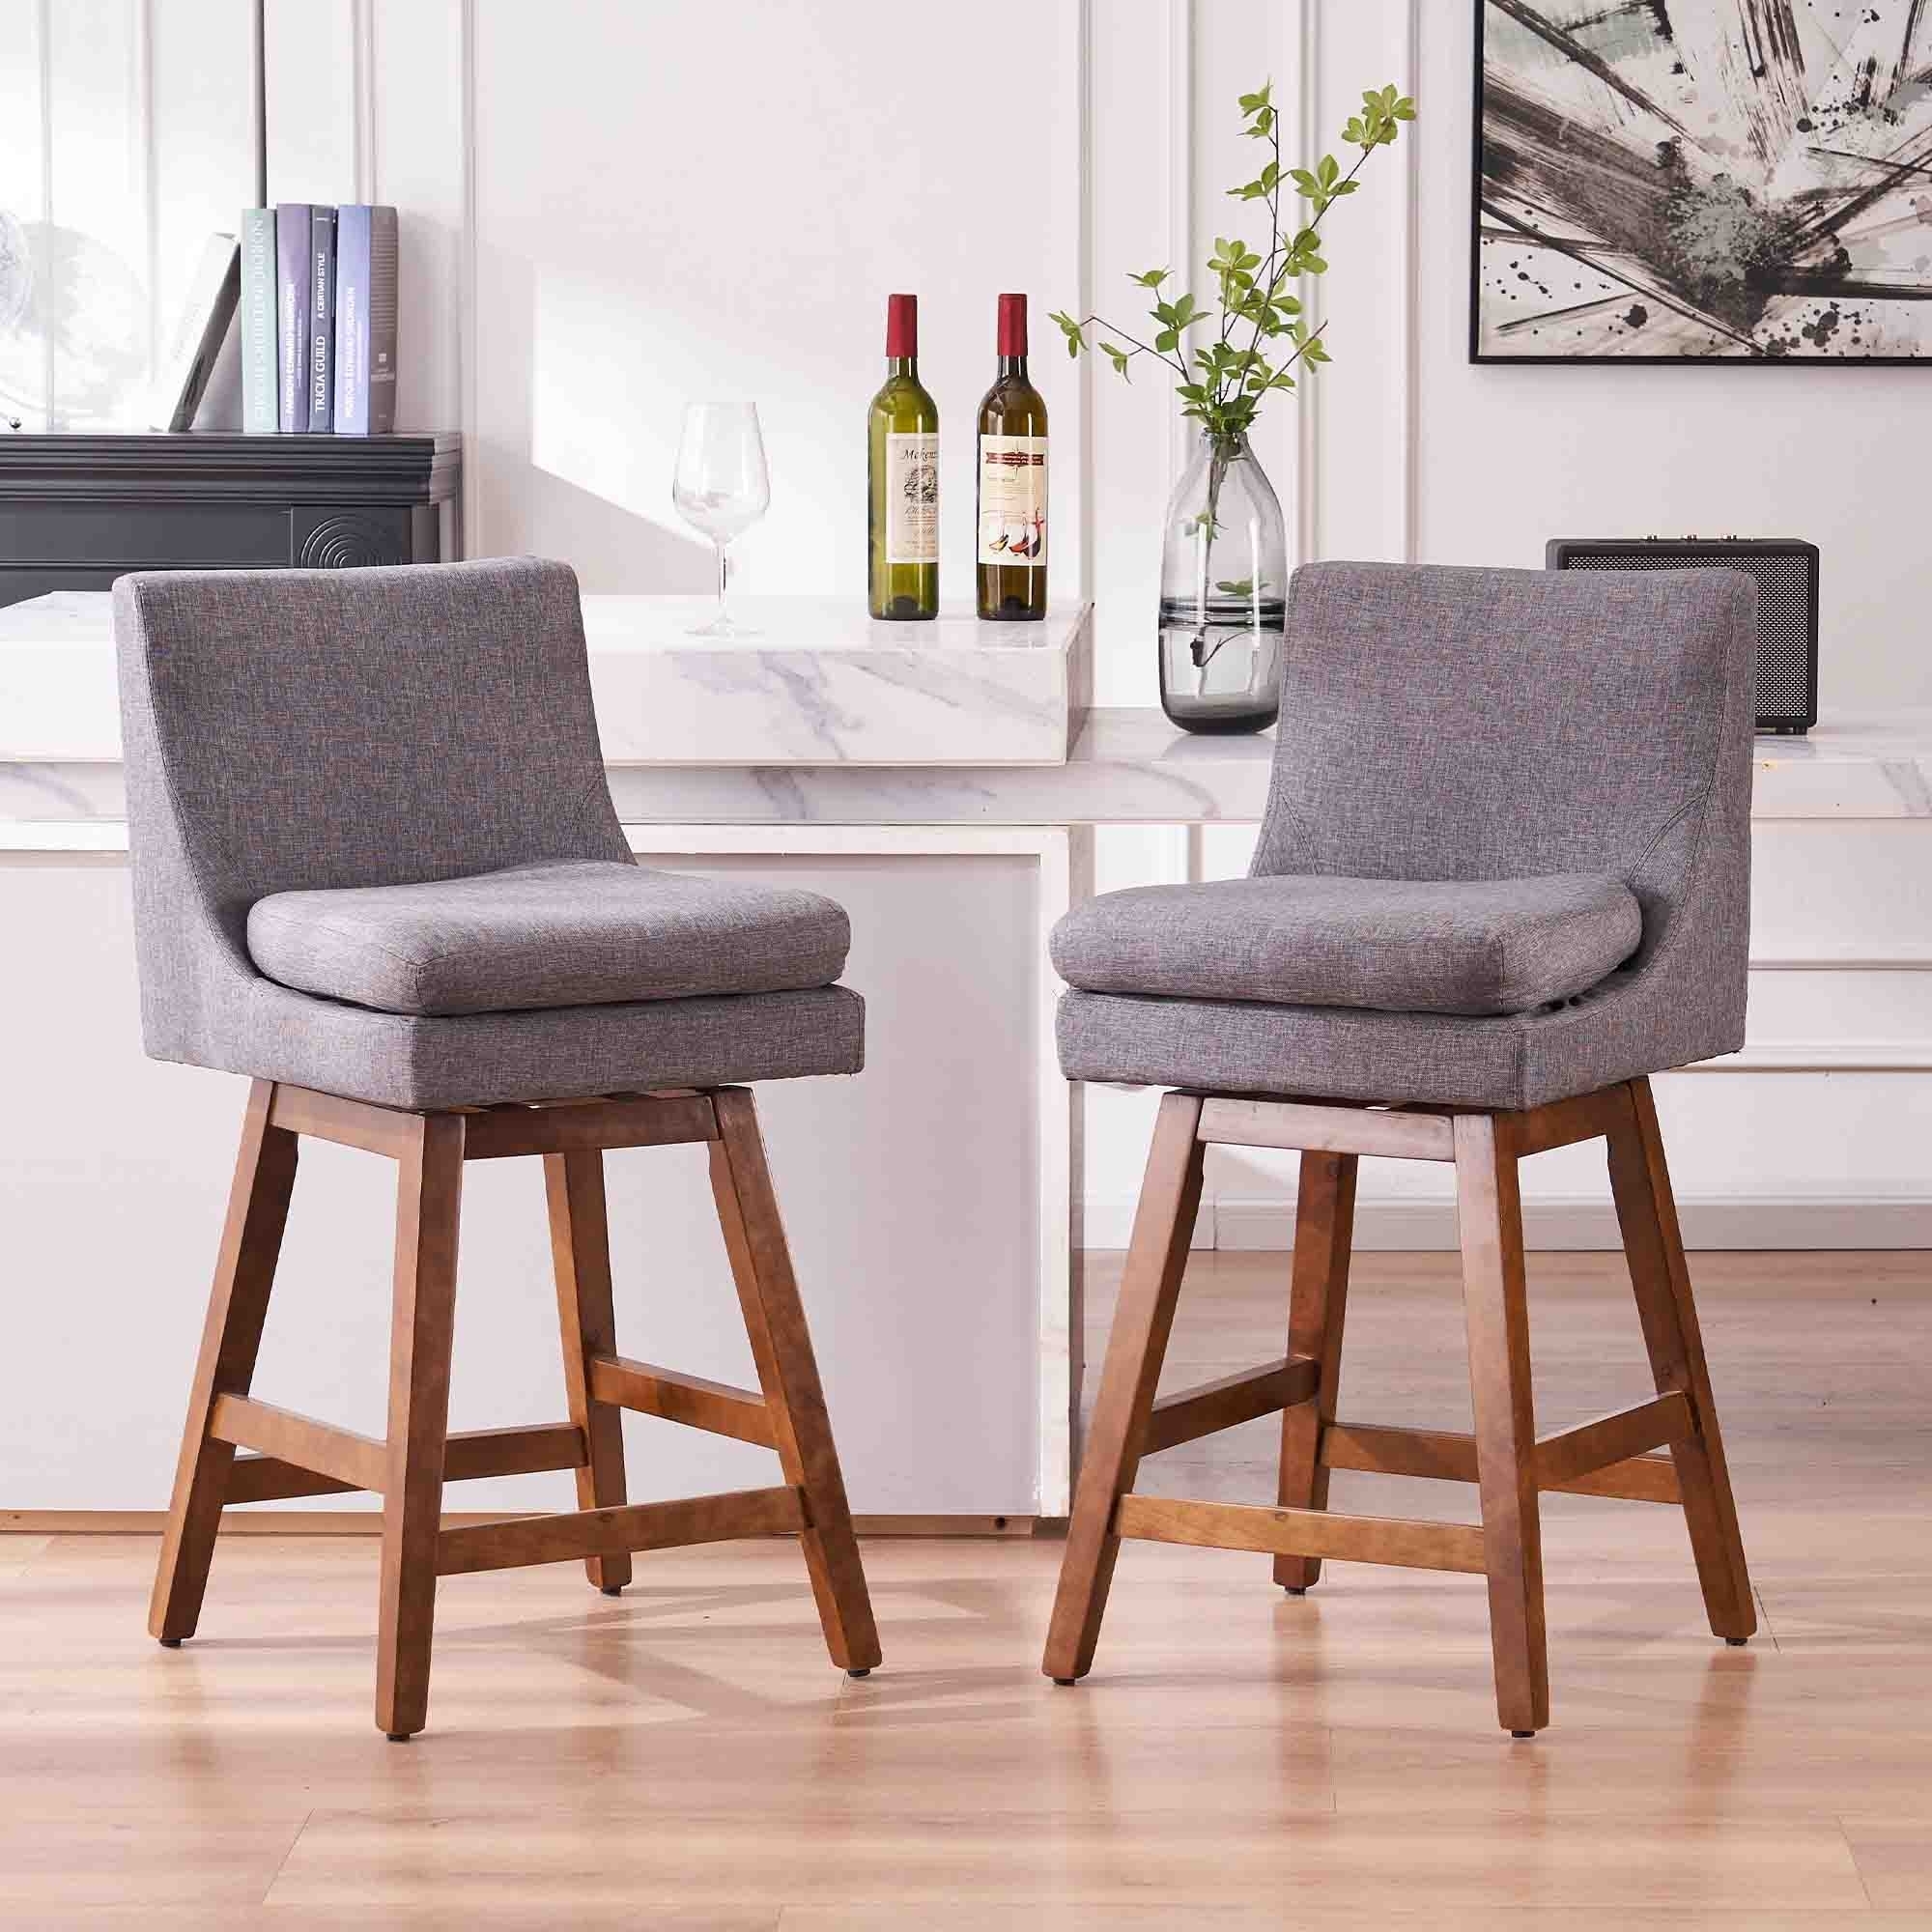 26 Inch Upholstered Swivel Fabric Counter Bar Stools With Back & Wood Legs - Light Grey